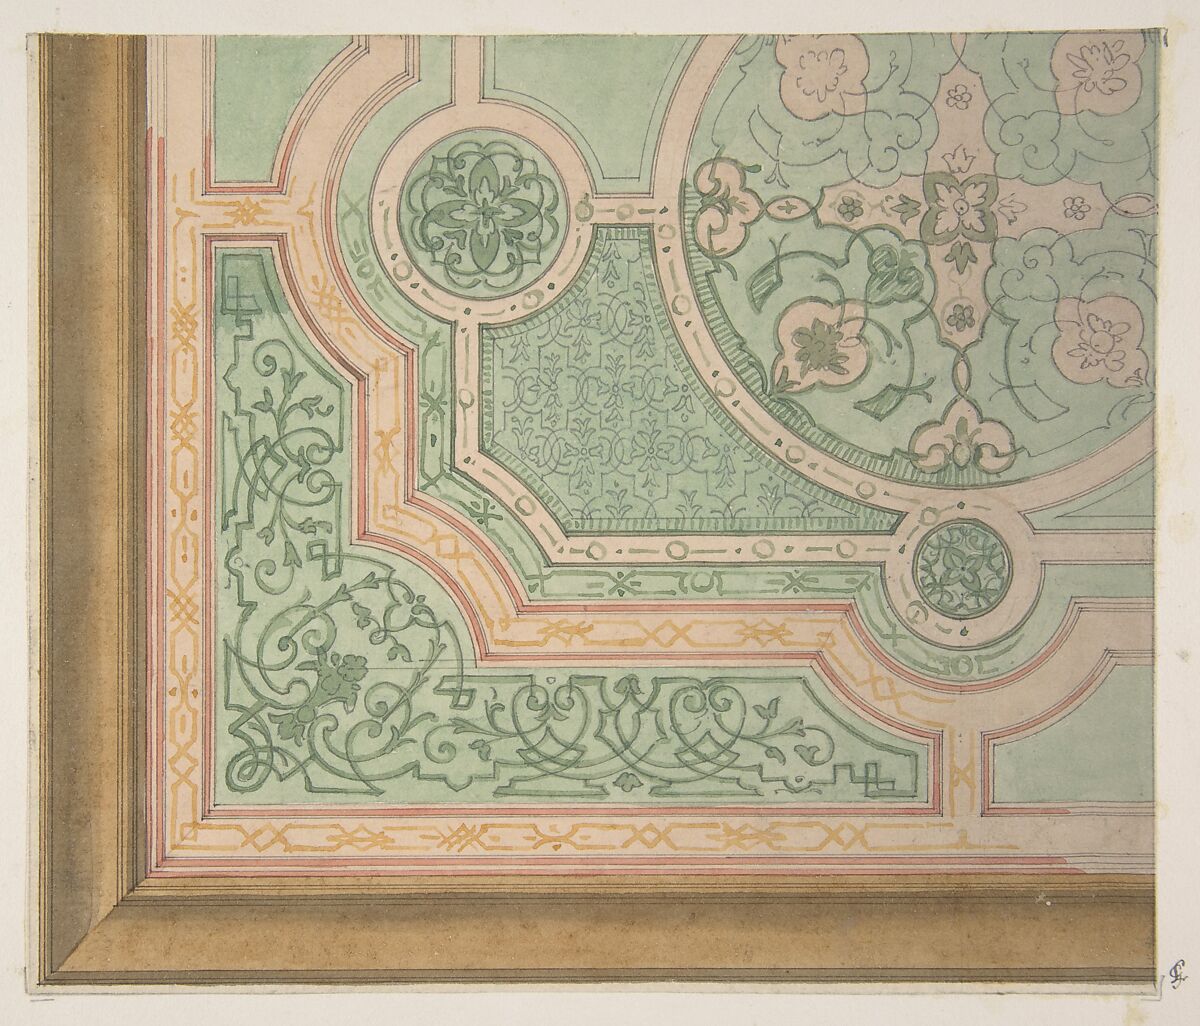 Design for the decoration of a ceiling with circular medallions, Jules-Edmond-Charles Lachaise (French, died 1897), graphite and watercolor on laid paper; mounted on wove paper 